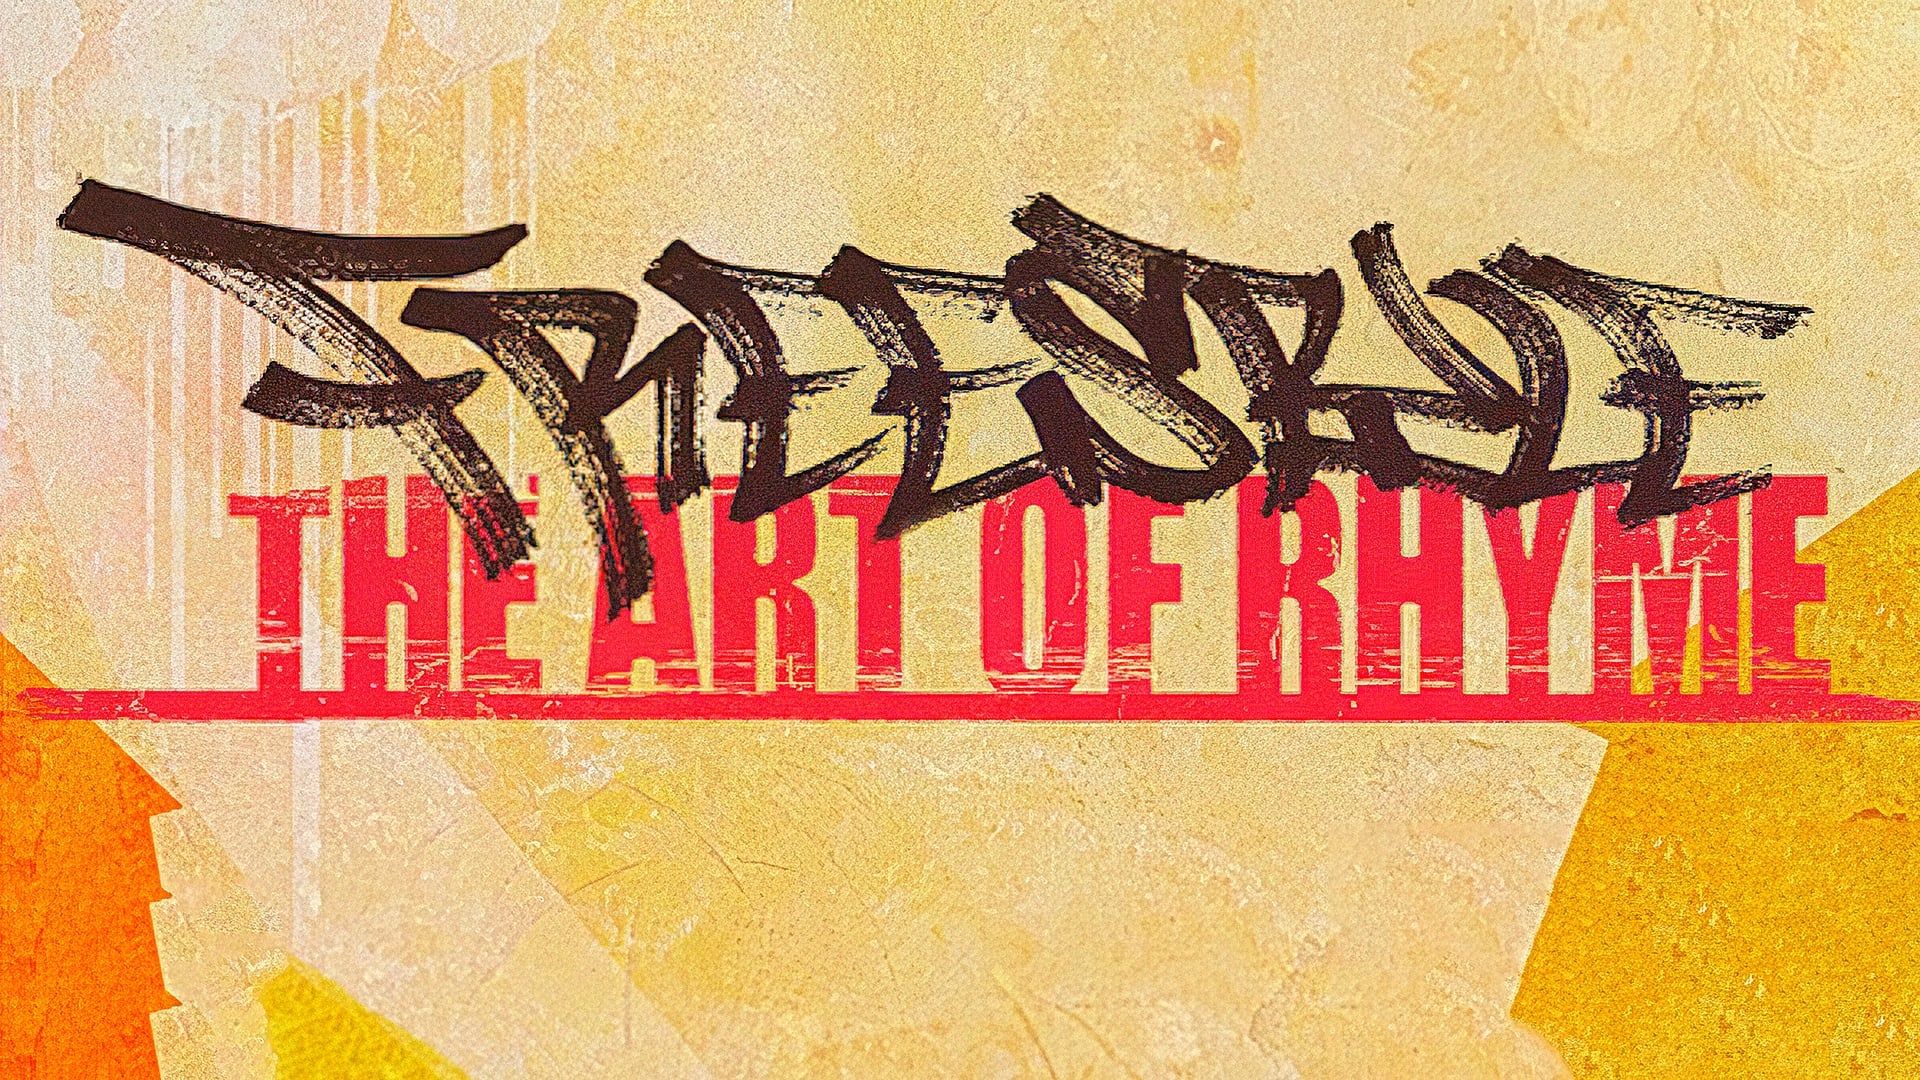 Freestyle: The Art of Rhyme background